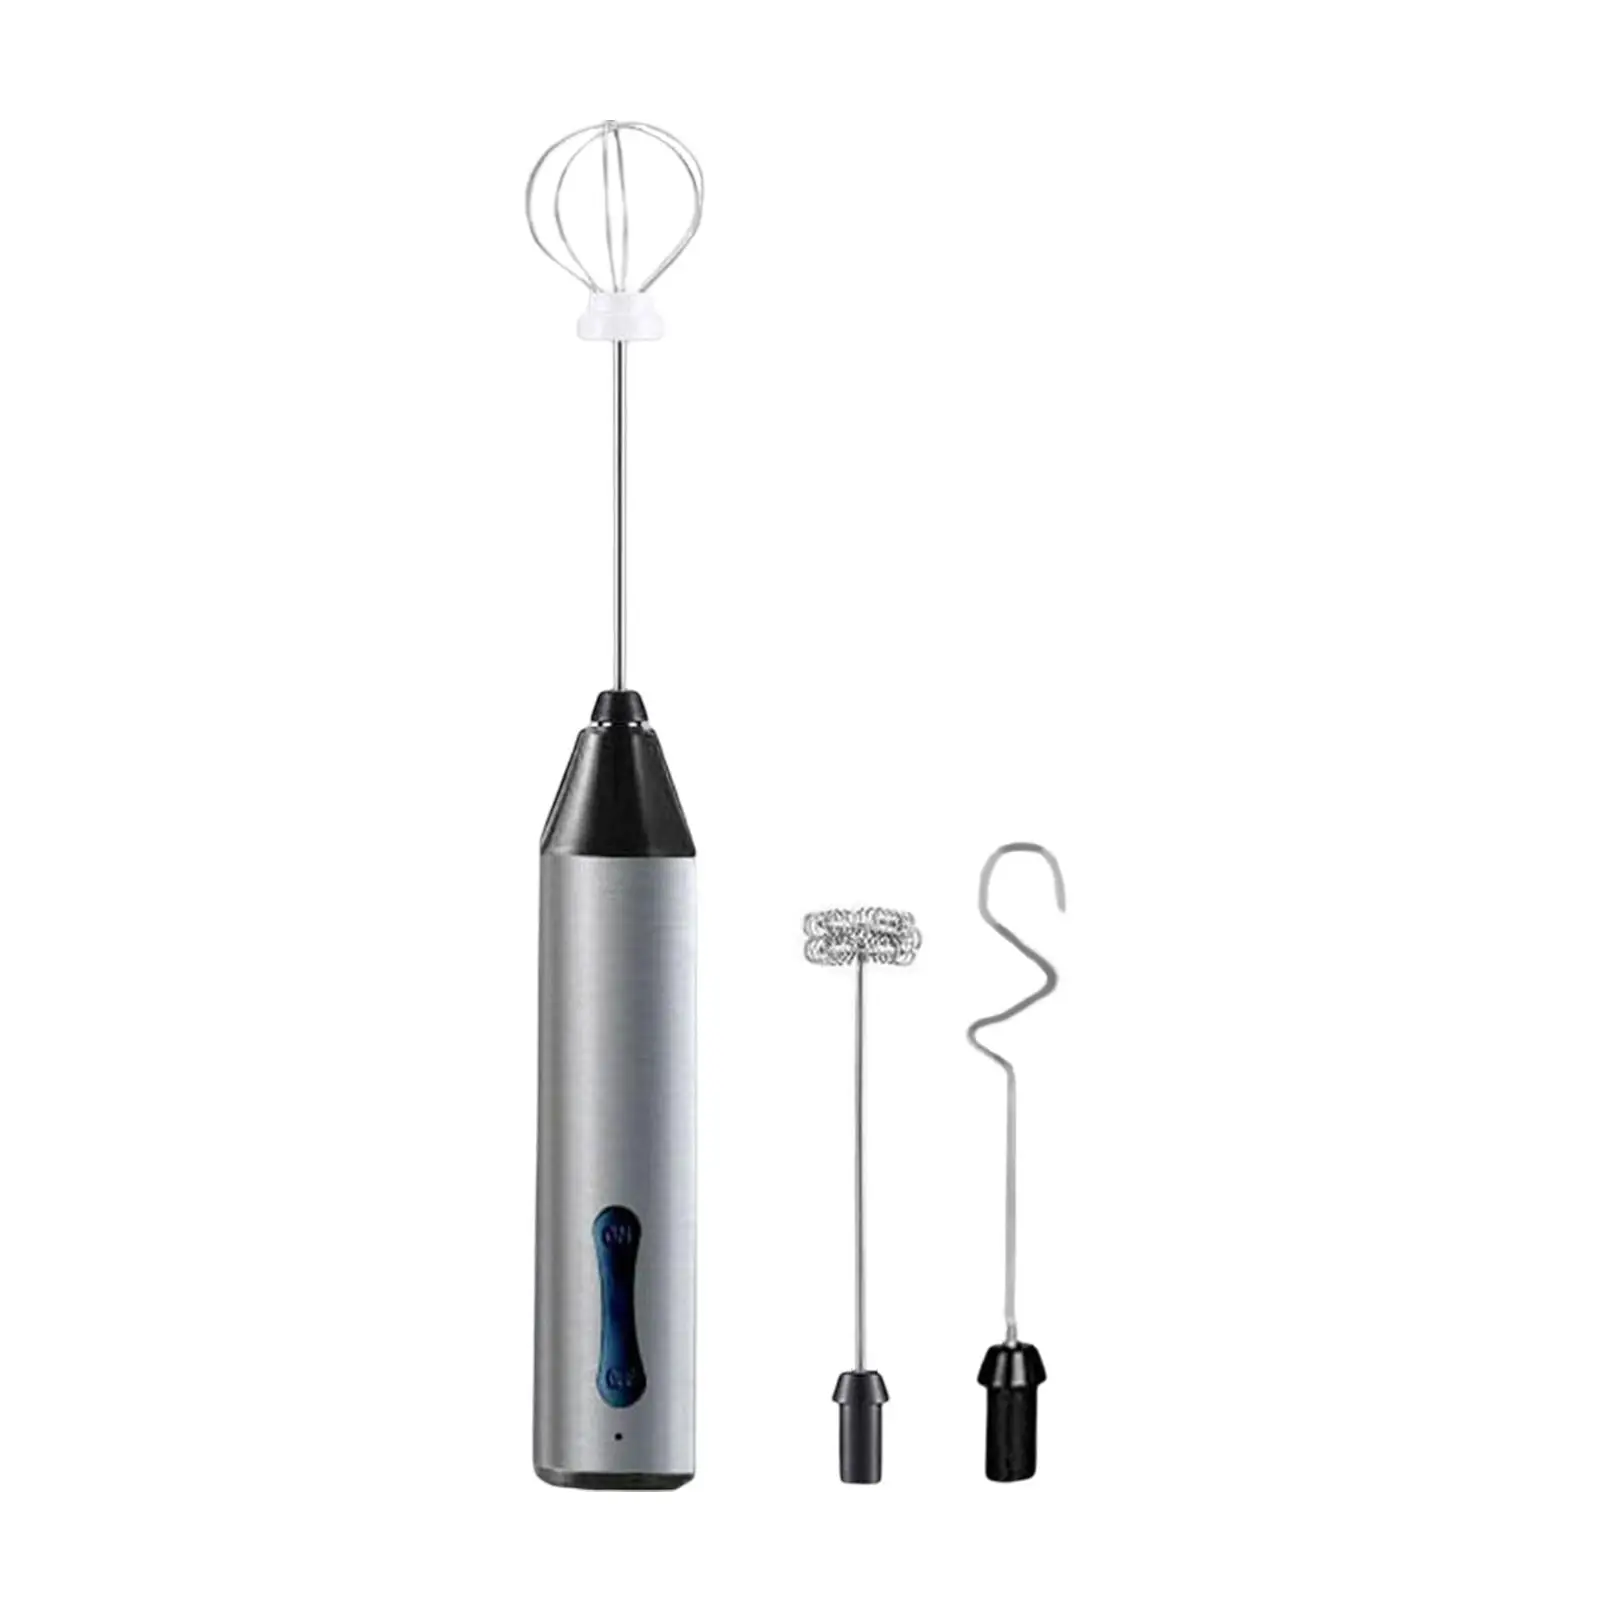 Portable Milk Frother Egg Beater USB C Rechargeable 2 Speeds with 3 Mixing Heads Whisk mixer Blender for Egg Latte Matcha